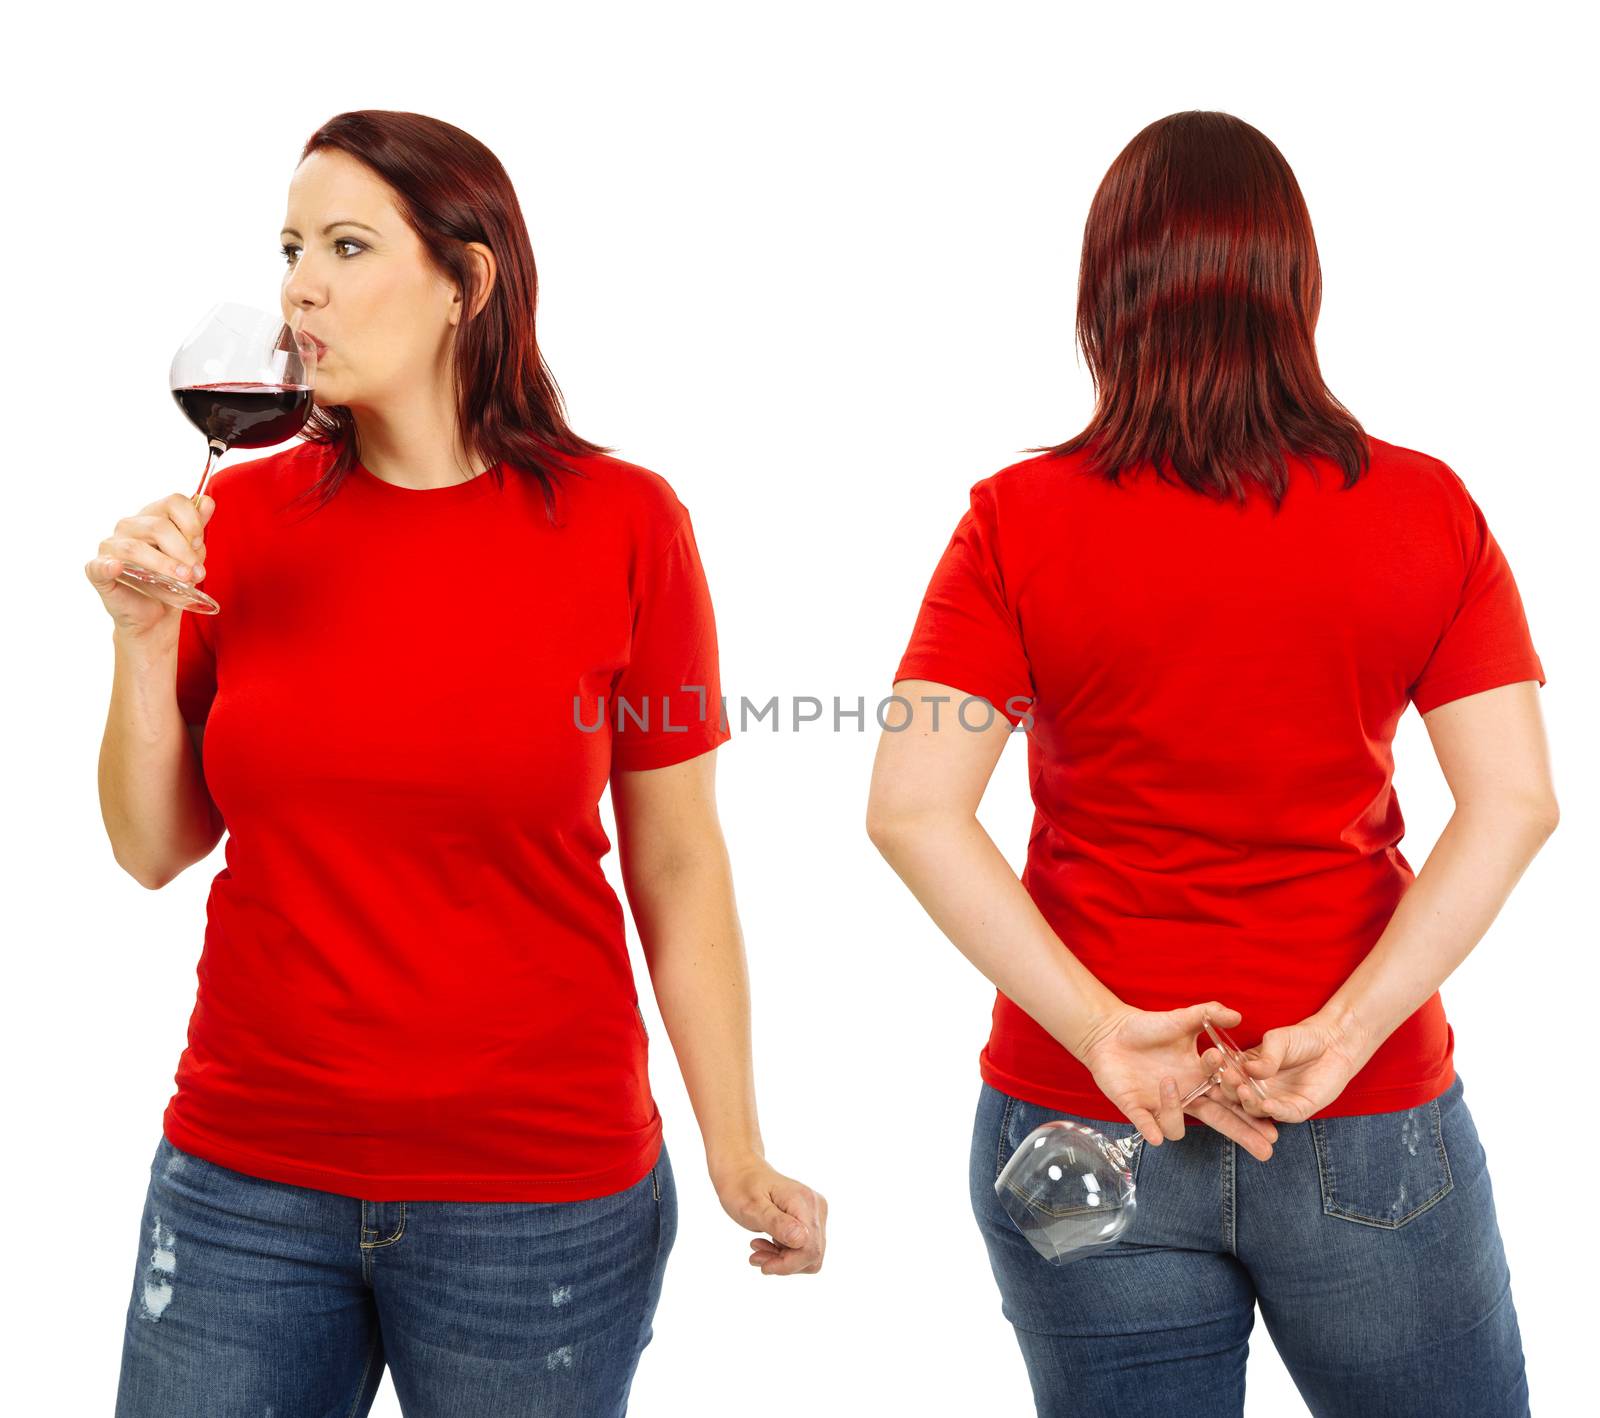 Photo of a woman posing with a blank red t-shirt drinking red wine, ready for your artwork or design.